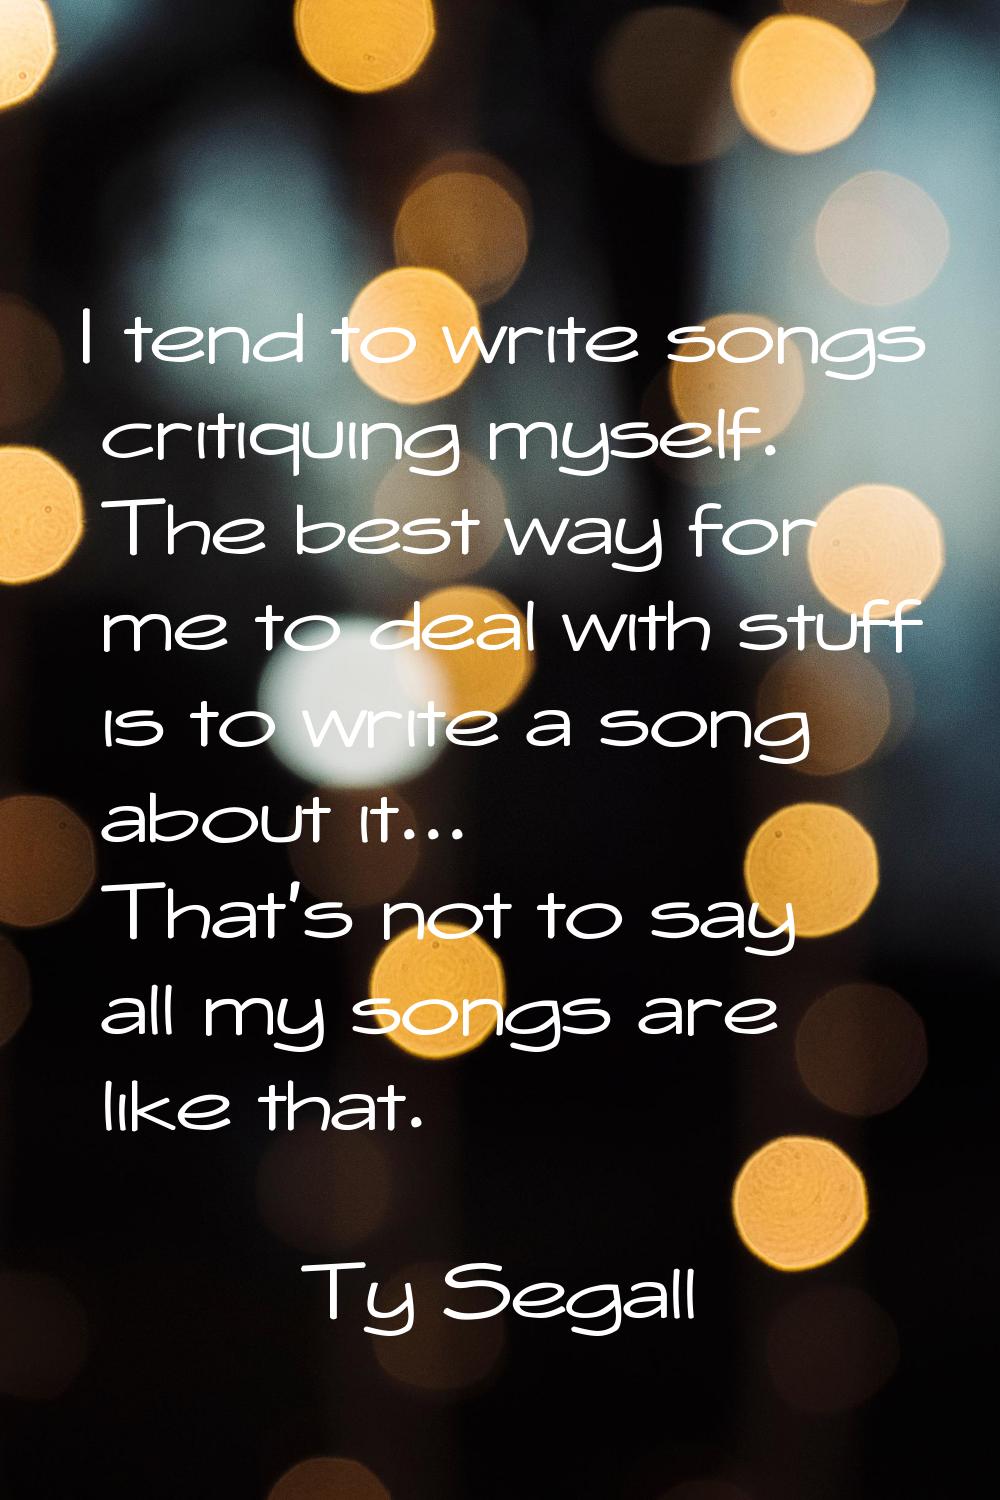 I tend to write songs critiquing myself. The best way for me to deal with stuff is to write a song 